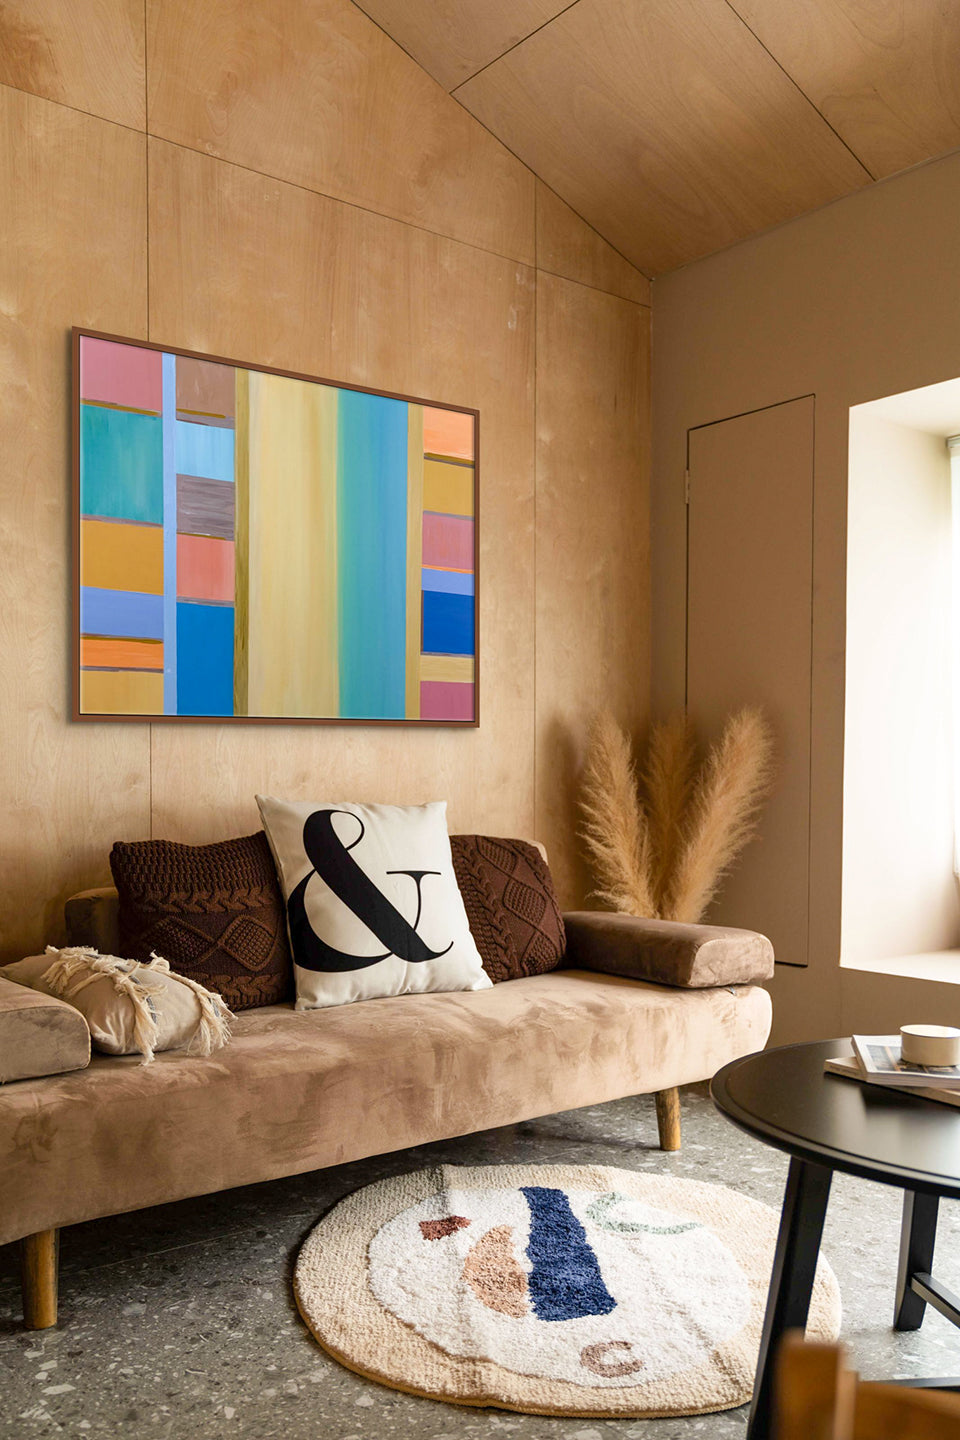 Enjoying Minimalism by Dorothea Sandra. abstract, contemporary painting featuring geometric shapes.